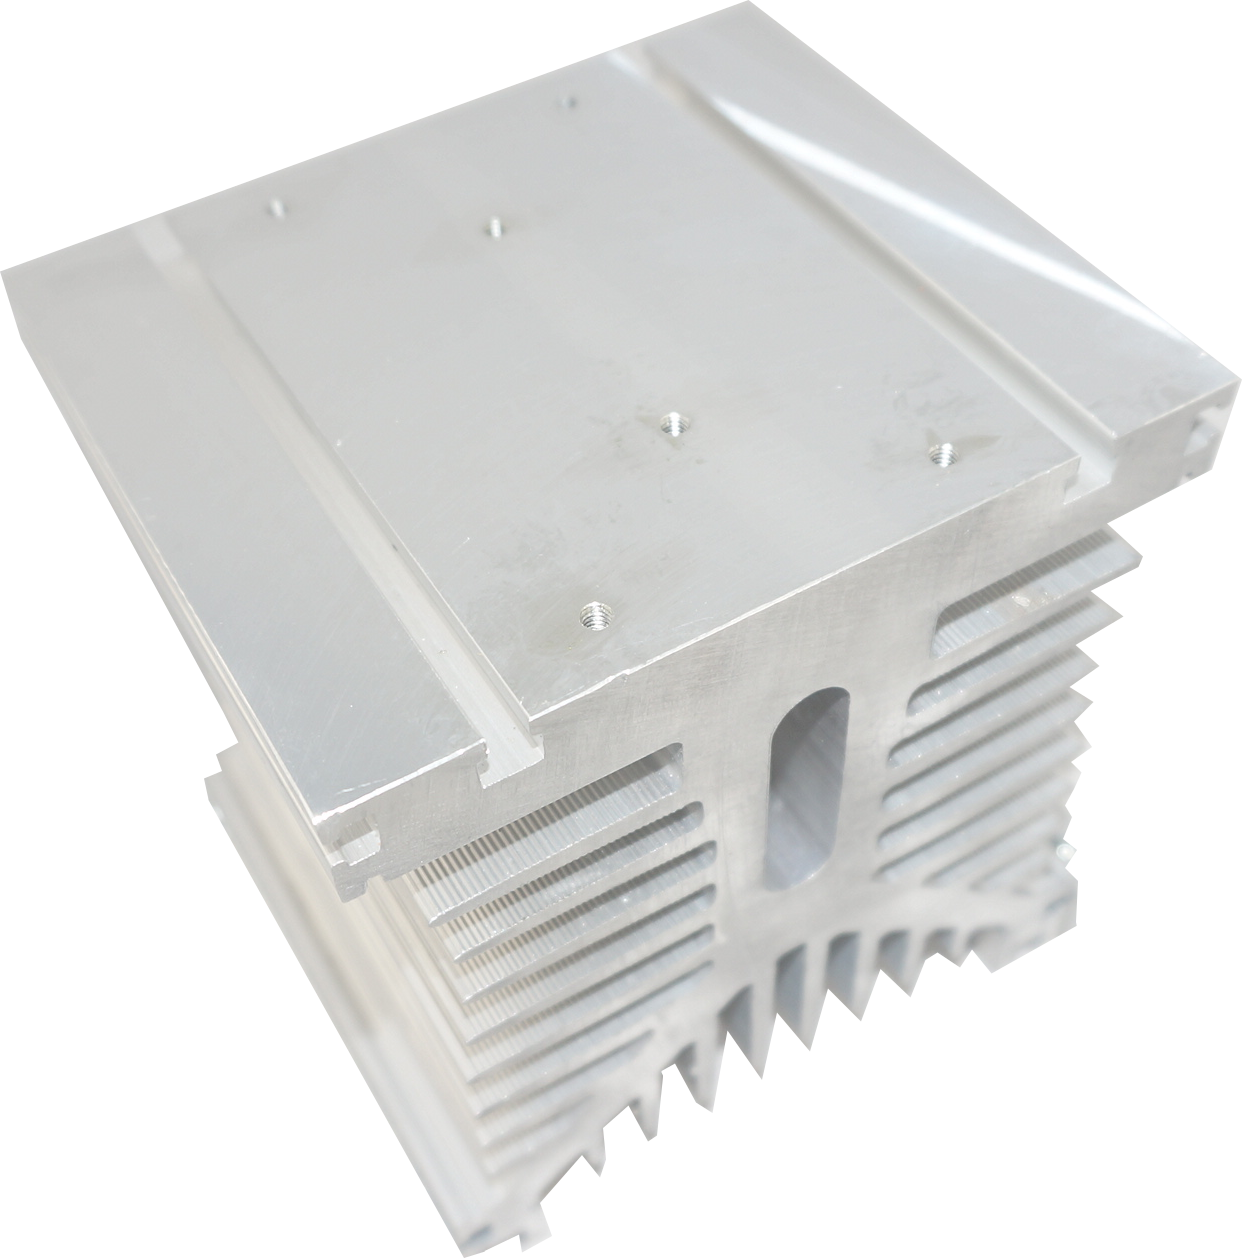 H31/110M-D, Heatsink 110mm, Milled, Drilled and Tapped for 3 Phase SSR, 0.5°C/Watt